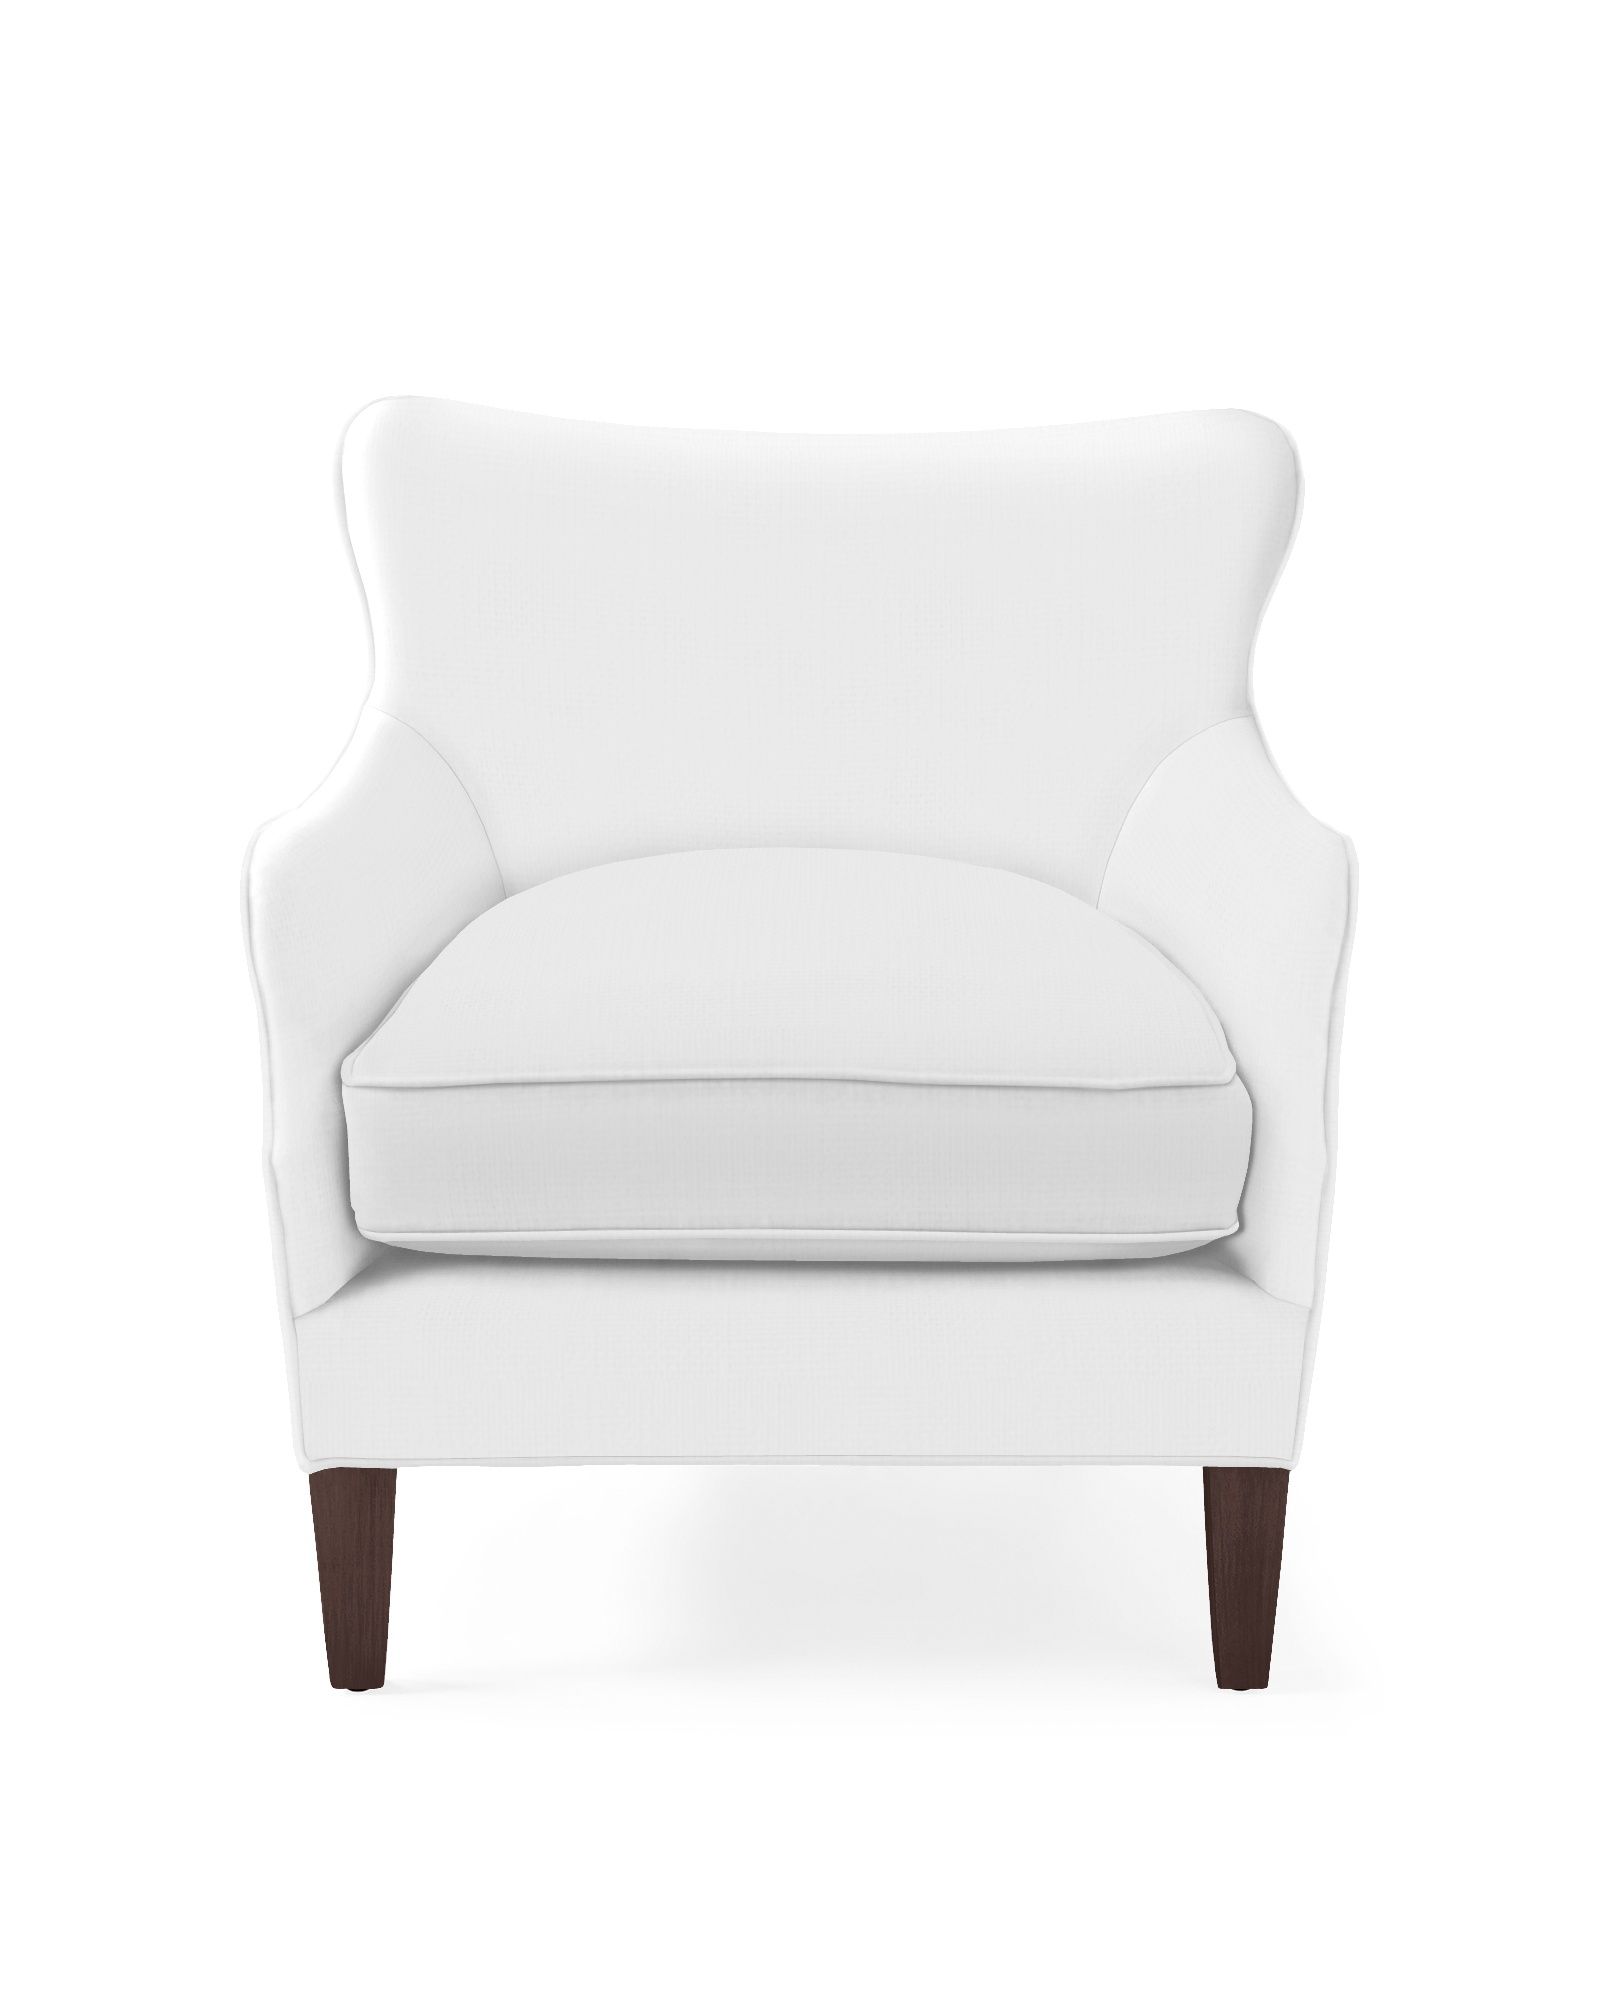 Elm Chair | Serena and Lily